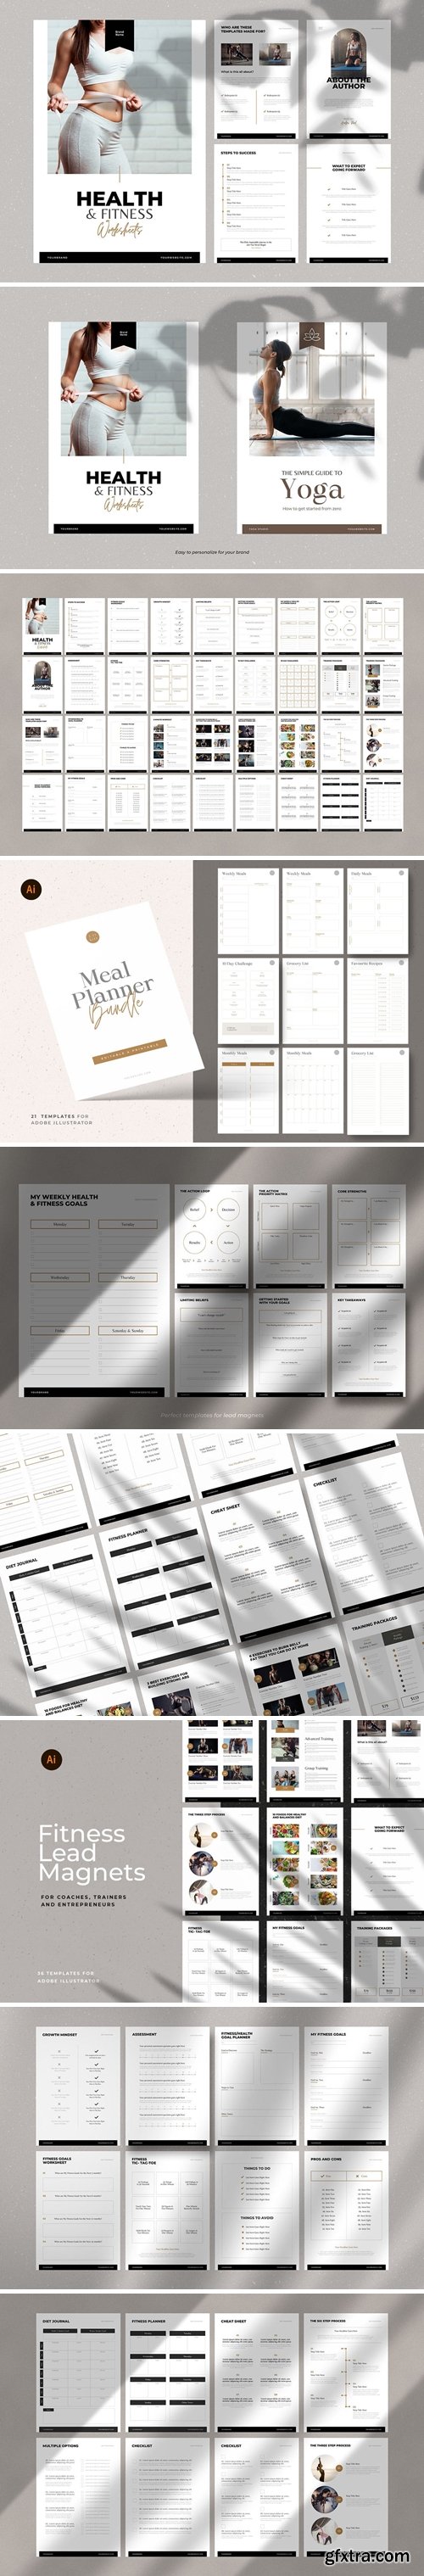 Fitness Lead Magnet Templates